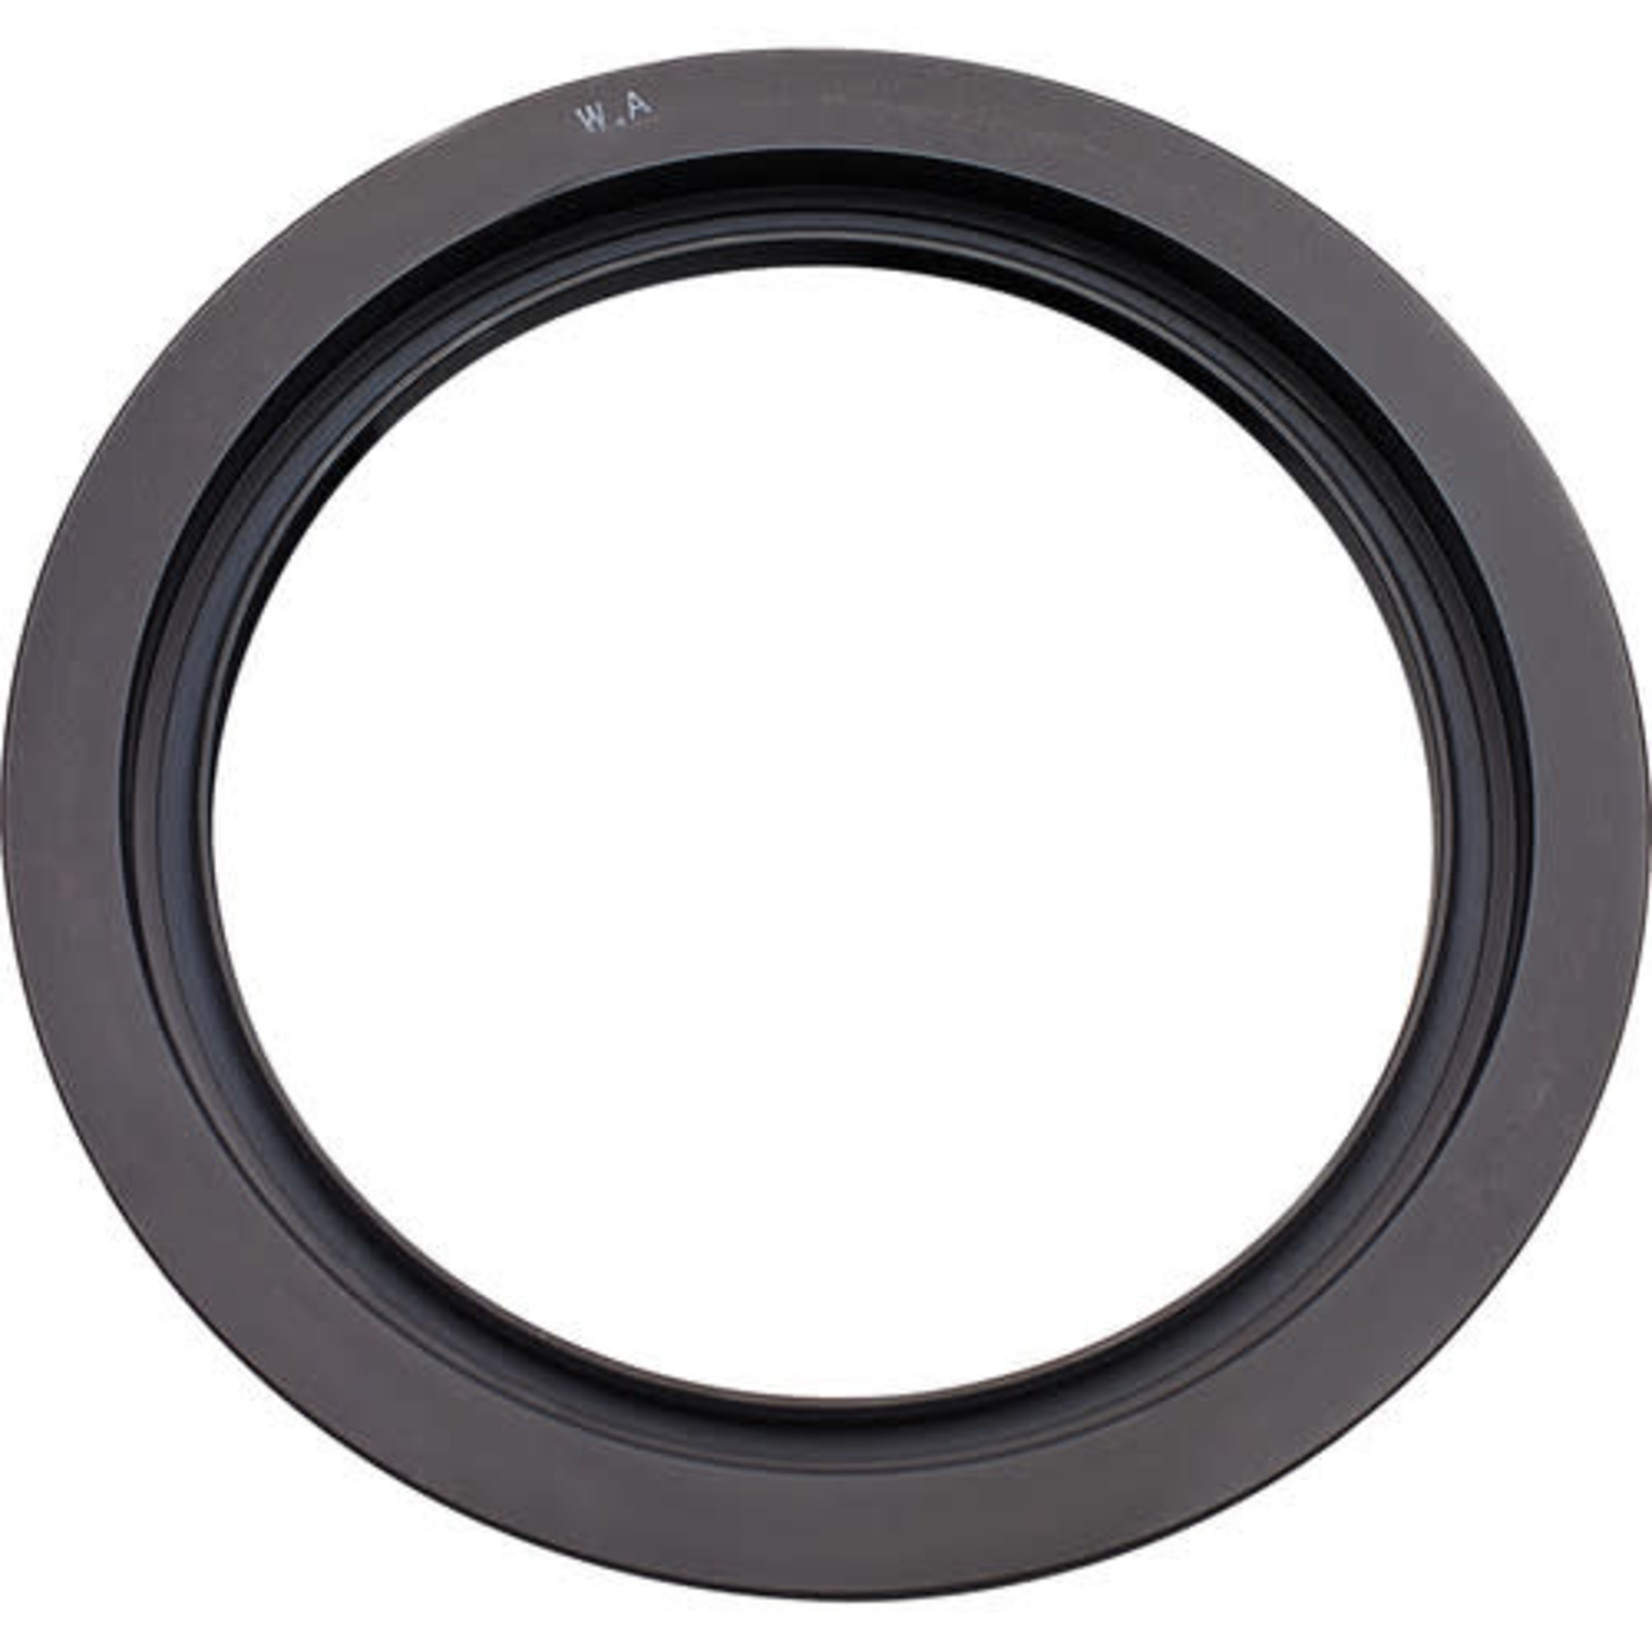 LEE Filters 77mm Wide-Angle Lens Adapter Ring for 100mm System